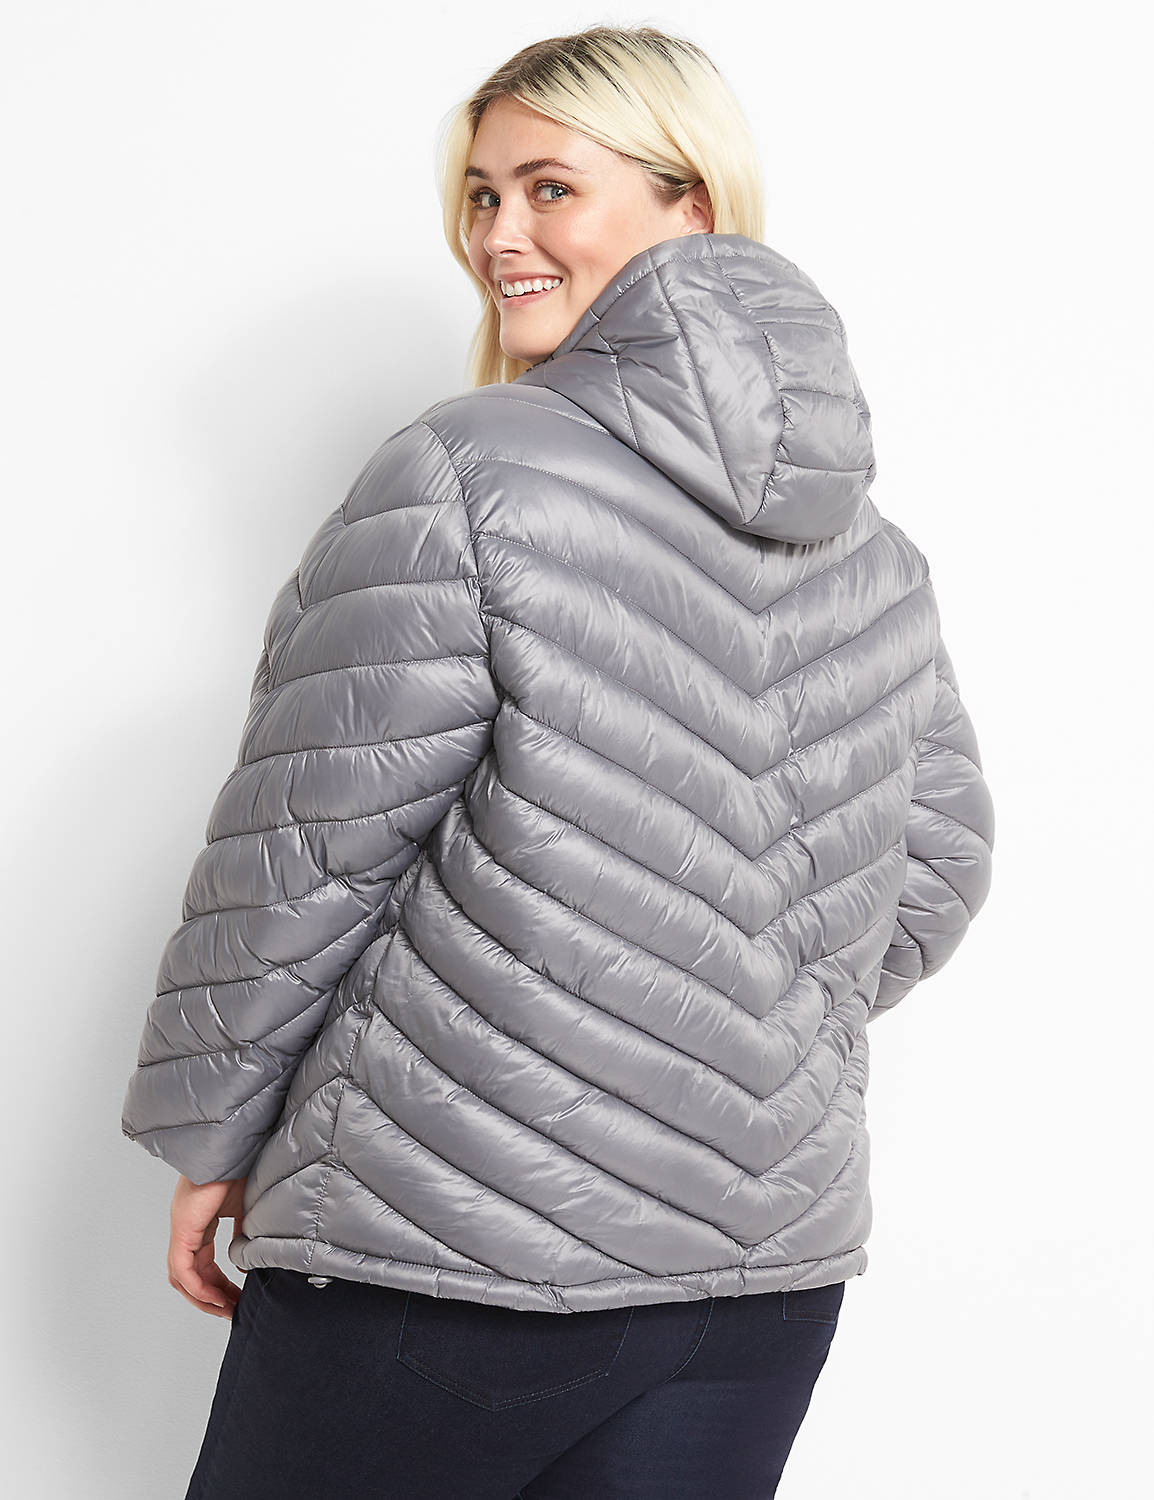 Packable Puffer 1123314 Product Image 2